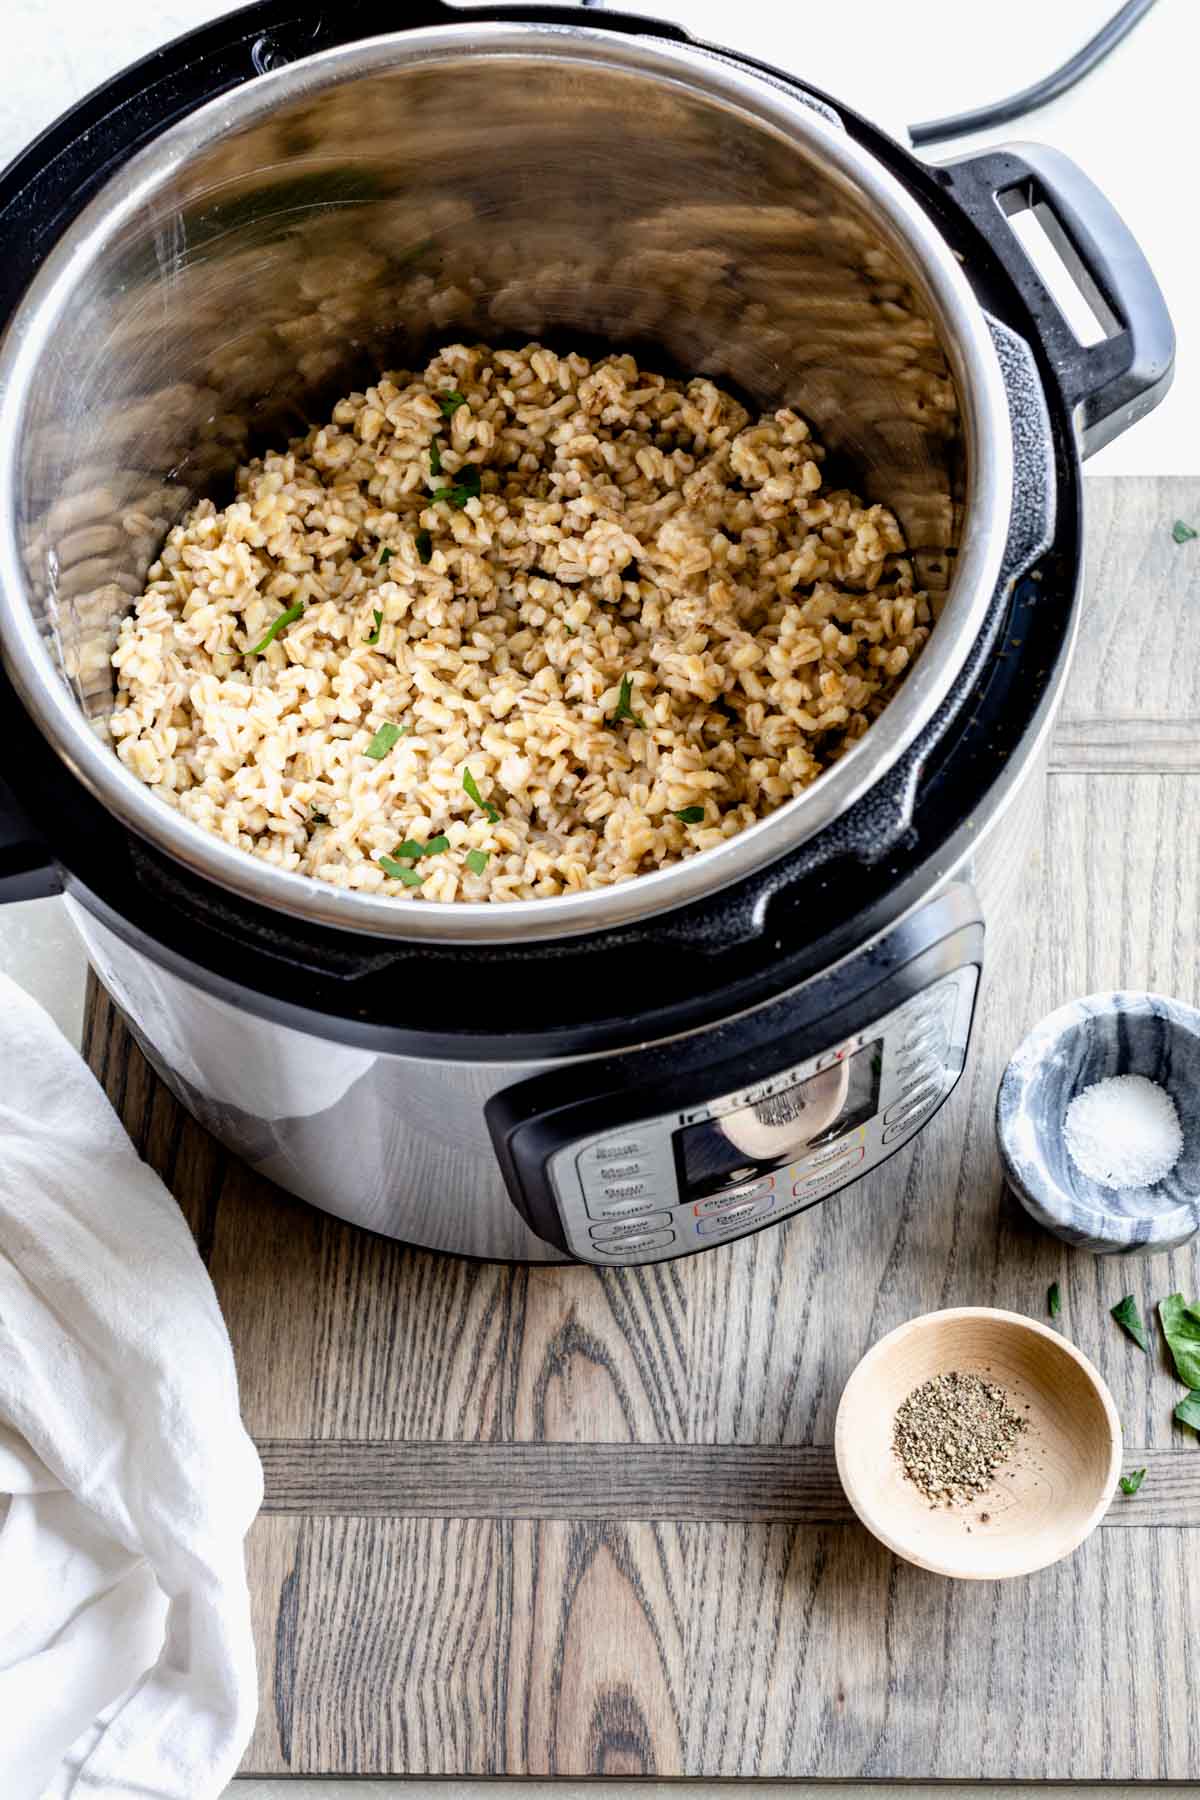 a view into an instant pot with cooked barley in it